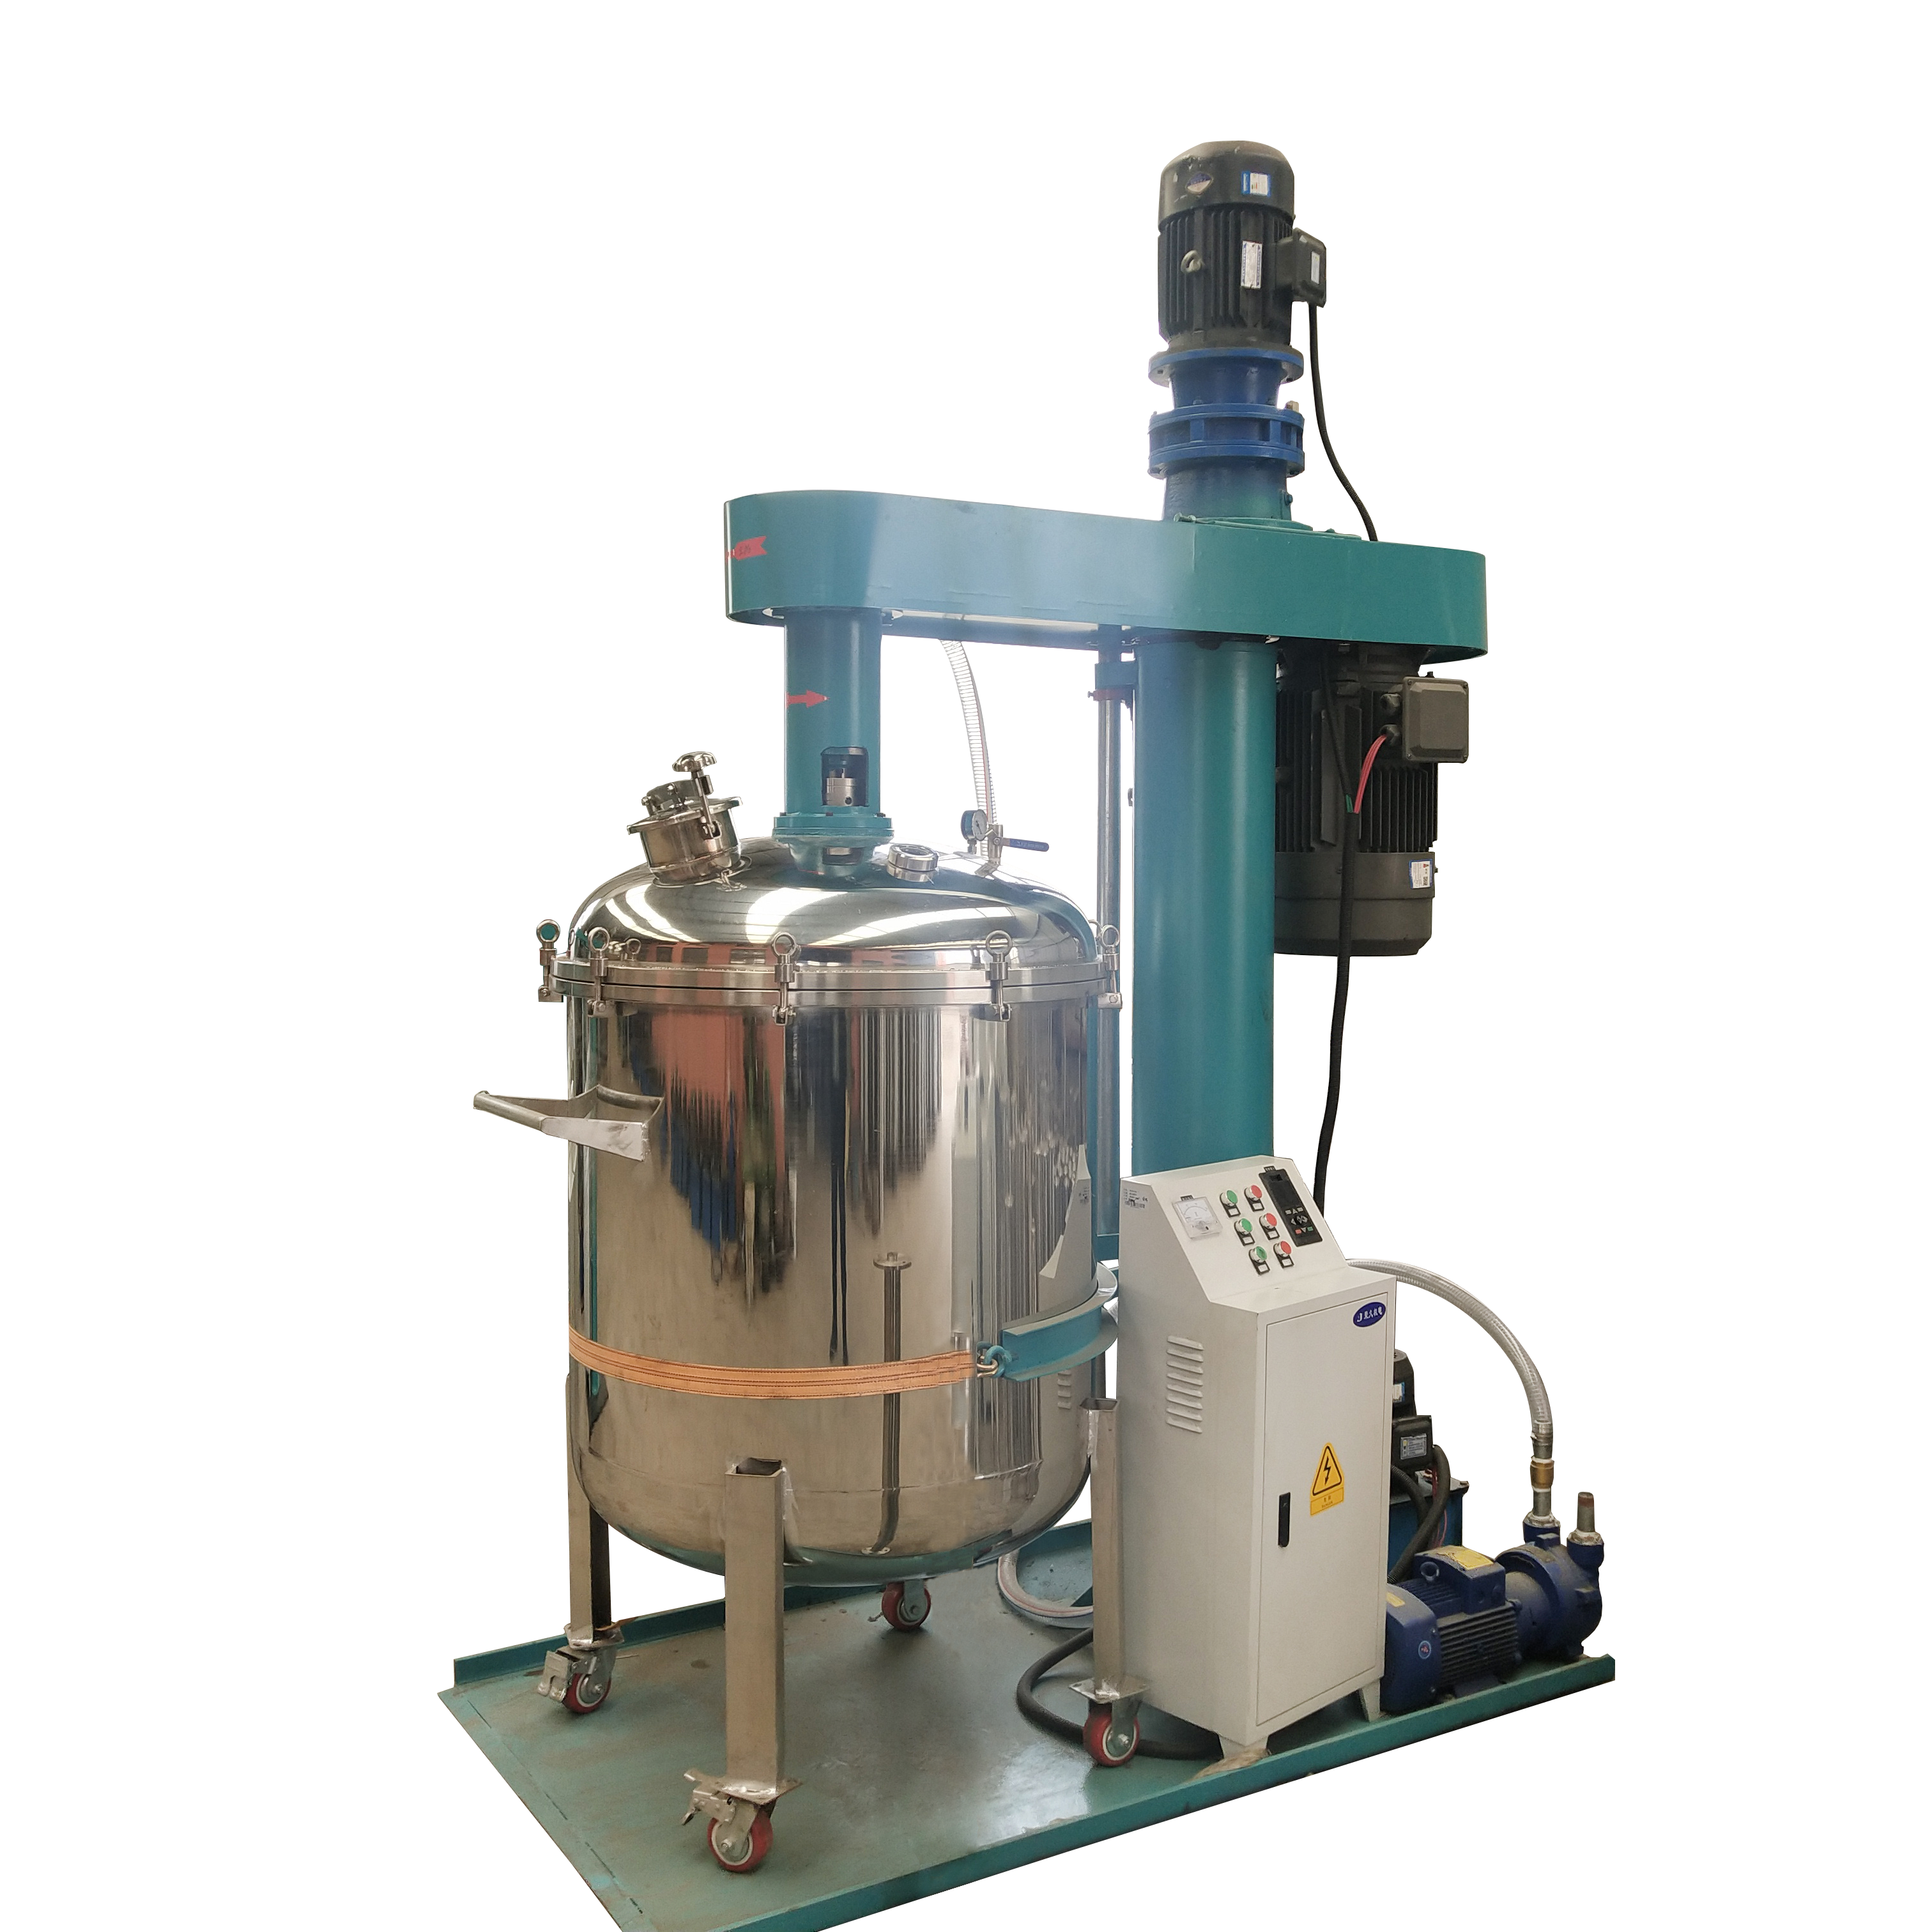 KARVIL 500L Multi-function Vacuum Disperser Machine with Hydraulic Lift Shaft